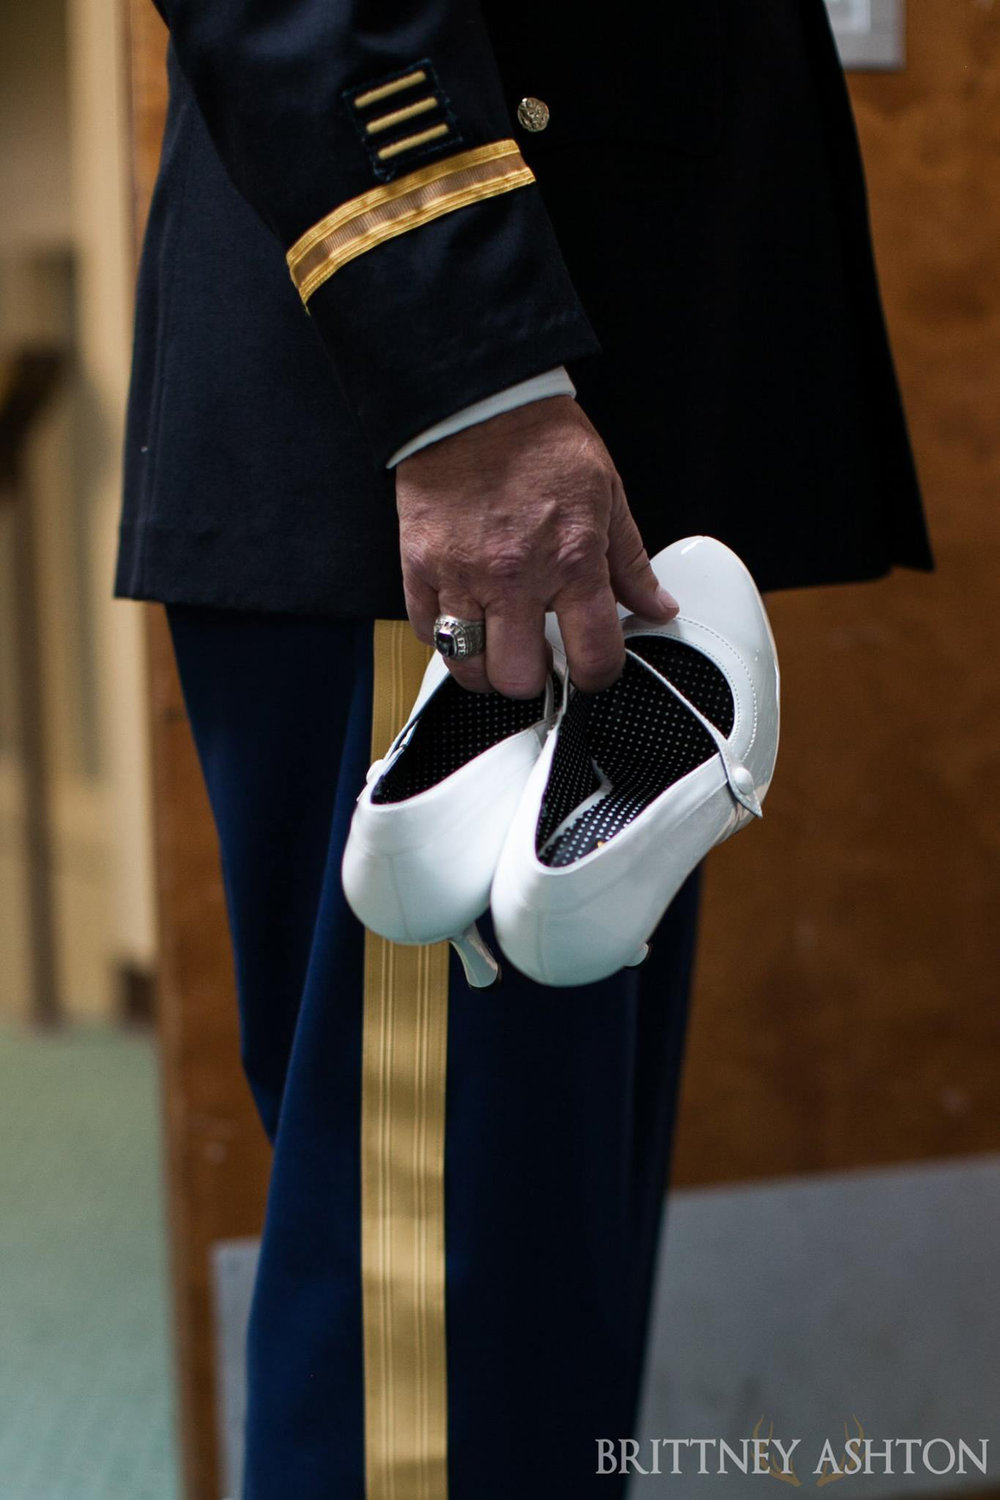  Samantha's dad wore his Army dress uniform to walk her down the aisle. 